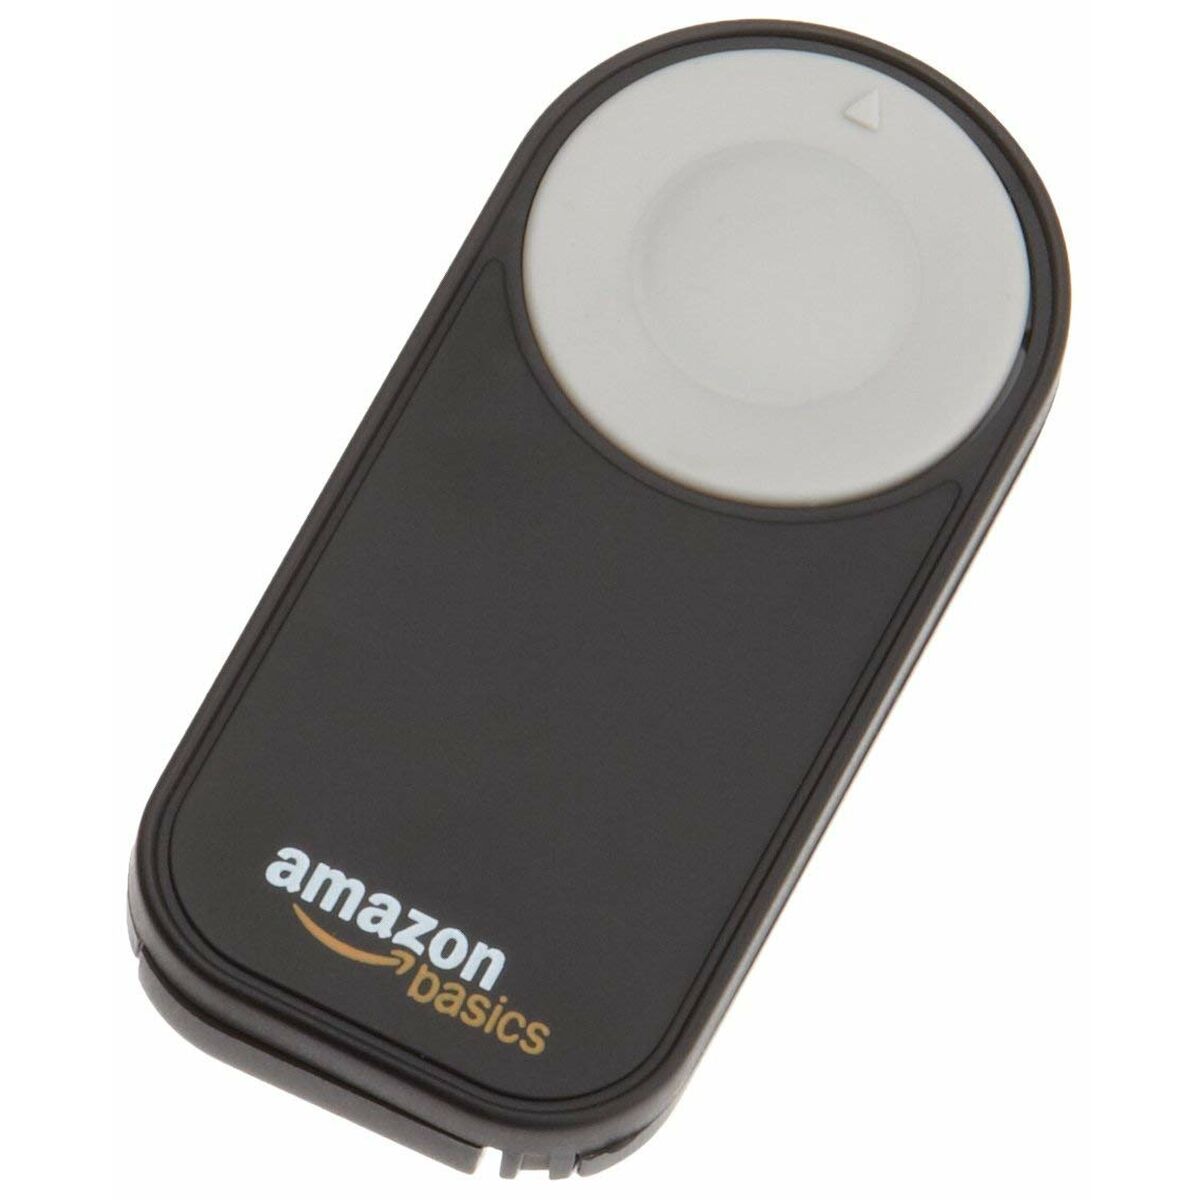 Remote Control for Selfies Amazon Basics (Refurbished A)